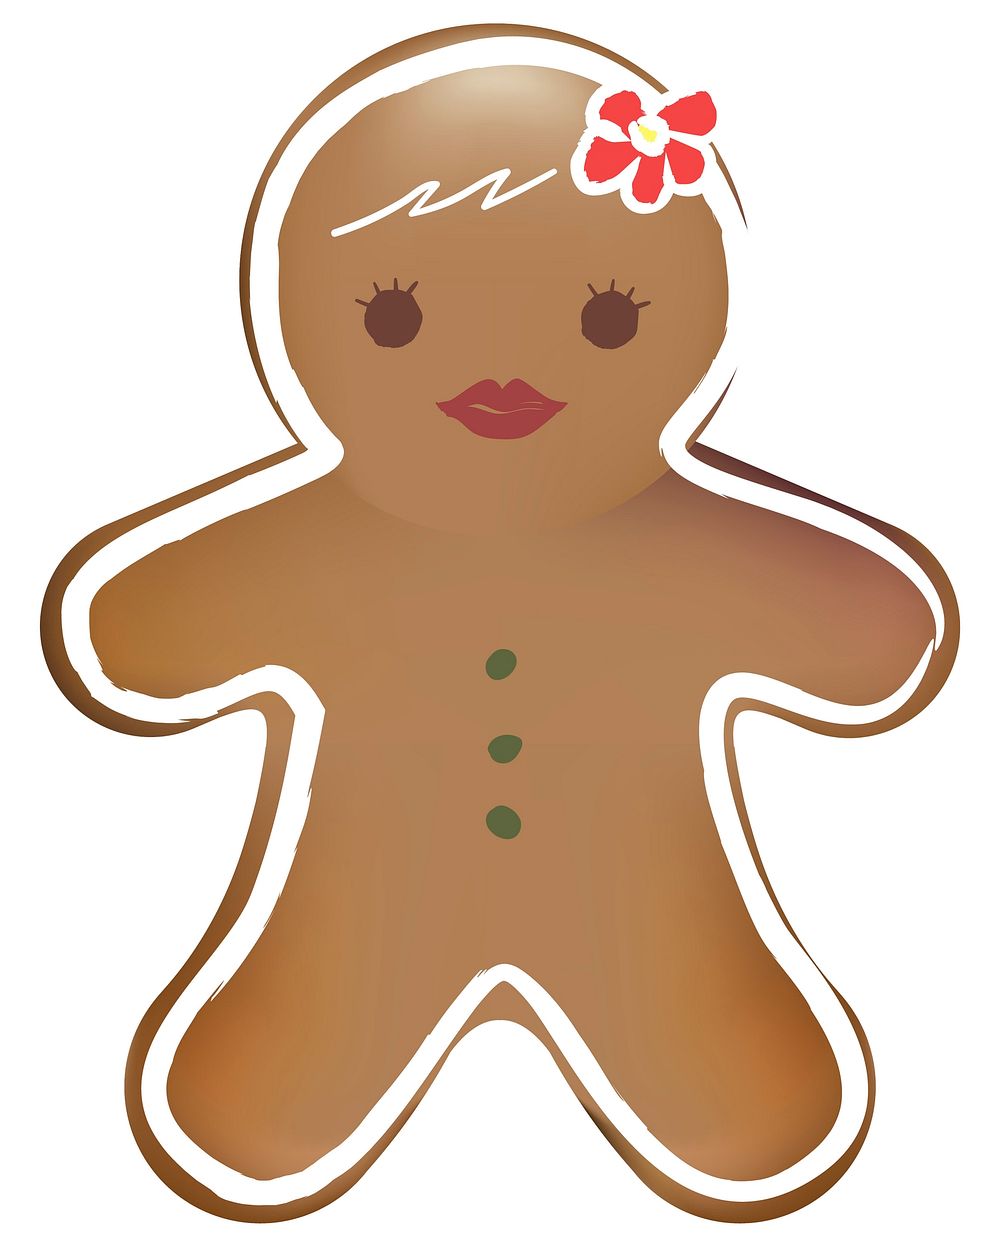 Illustration of gingerbread cookie